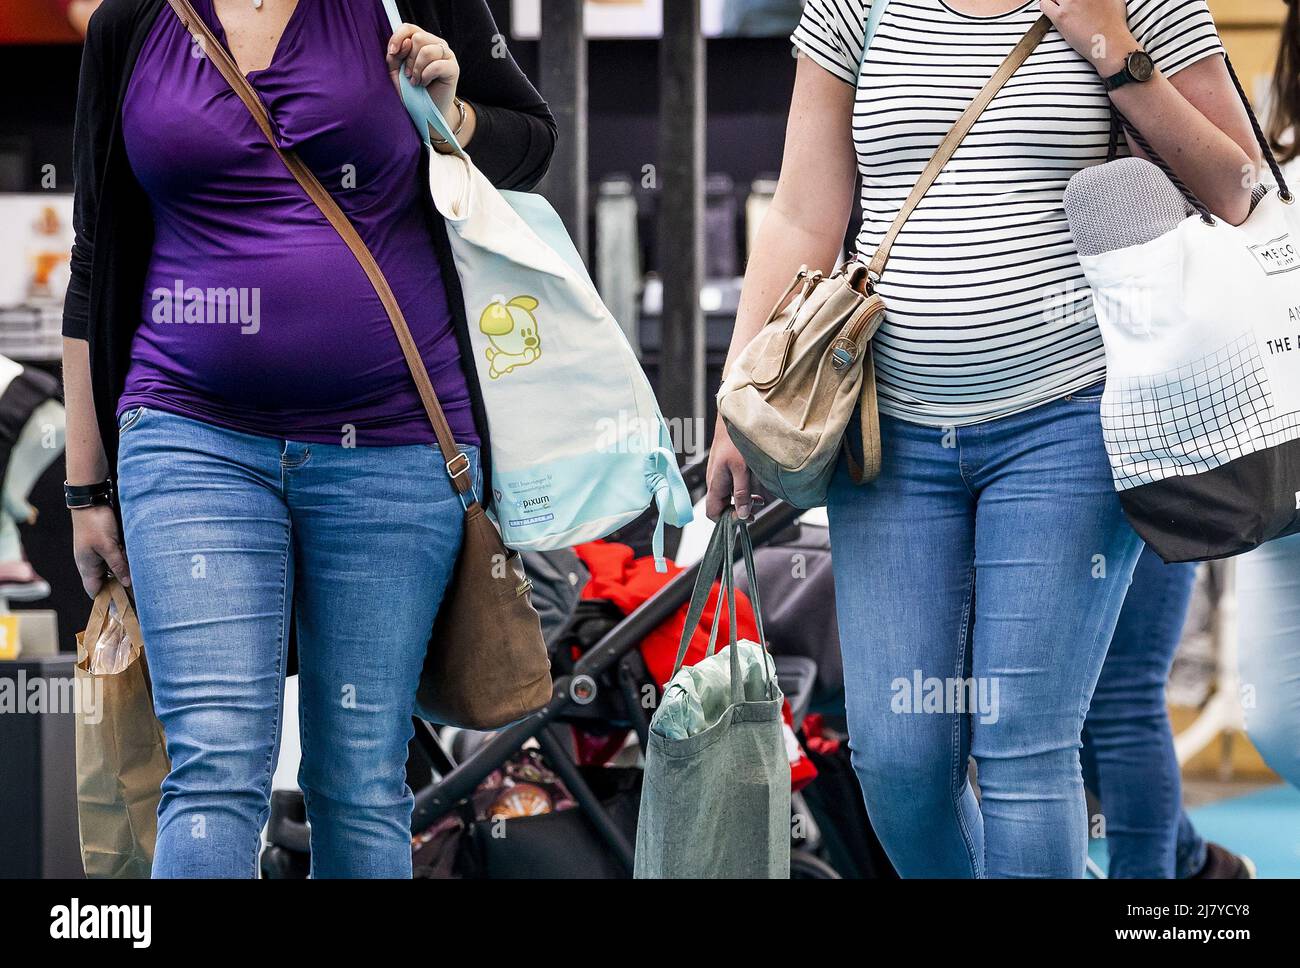 2022-05-11 16:14:16 AMSTERDAM - Visitors on the first day of the Nine Months Fair in the RAI. It is the first time since the outbreak of the corona pandemic that the fair on pregnancy and babies is taking place again. REMKO DE WAAL netherlands out - belgium out Stock Photo